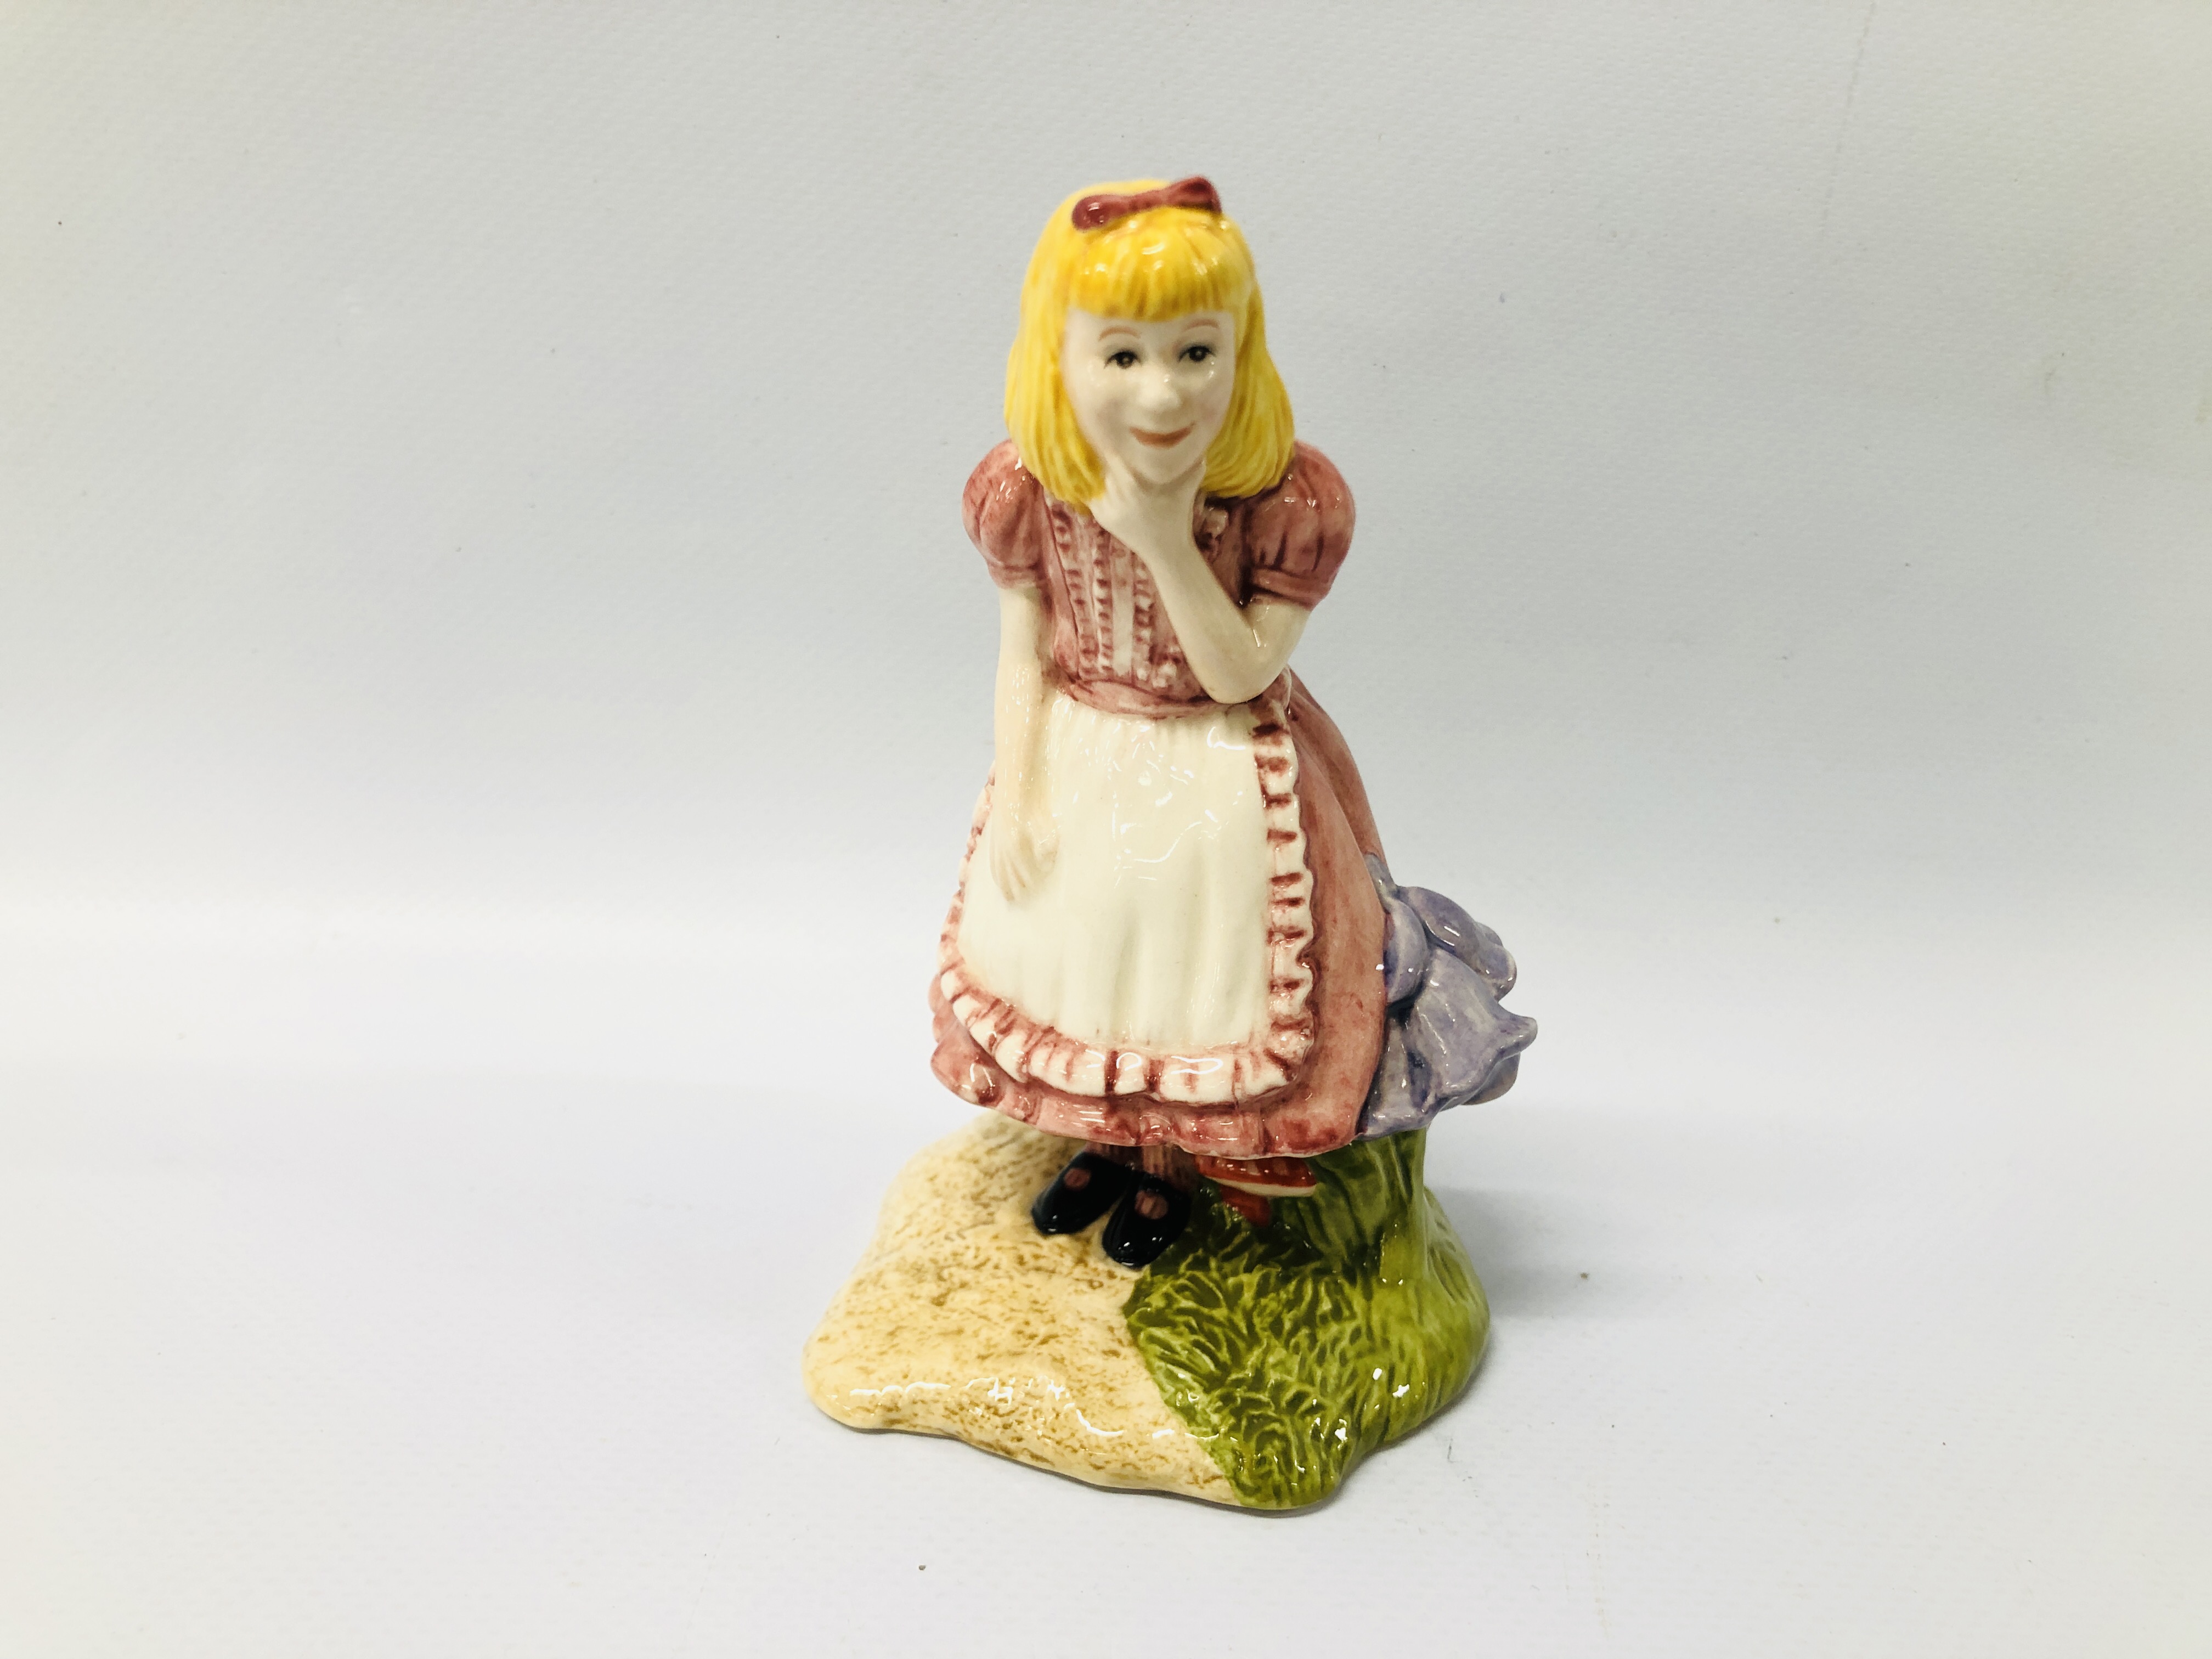 2 X BESWICK LIMITED EDITION ORNAMENTS COMPRISING "ALICE" LC2 1586 / 2500 & "THE CHESHIRE CAT" LC3 - Image 7 of 10